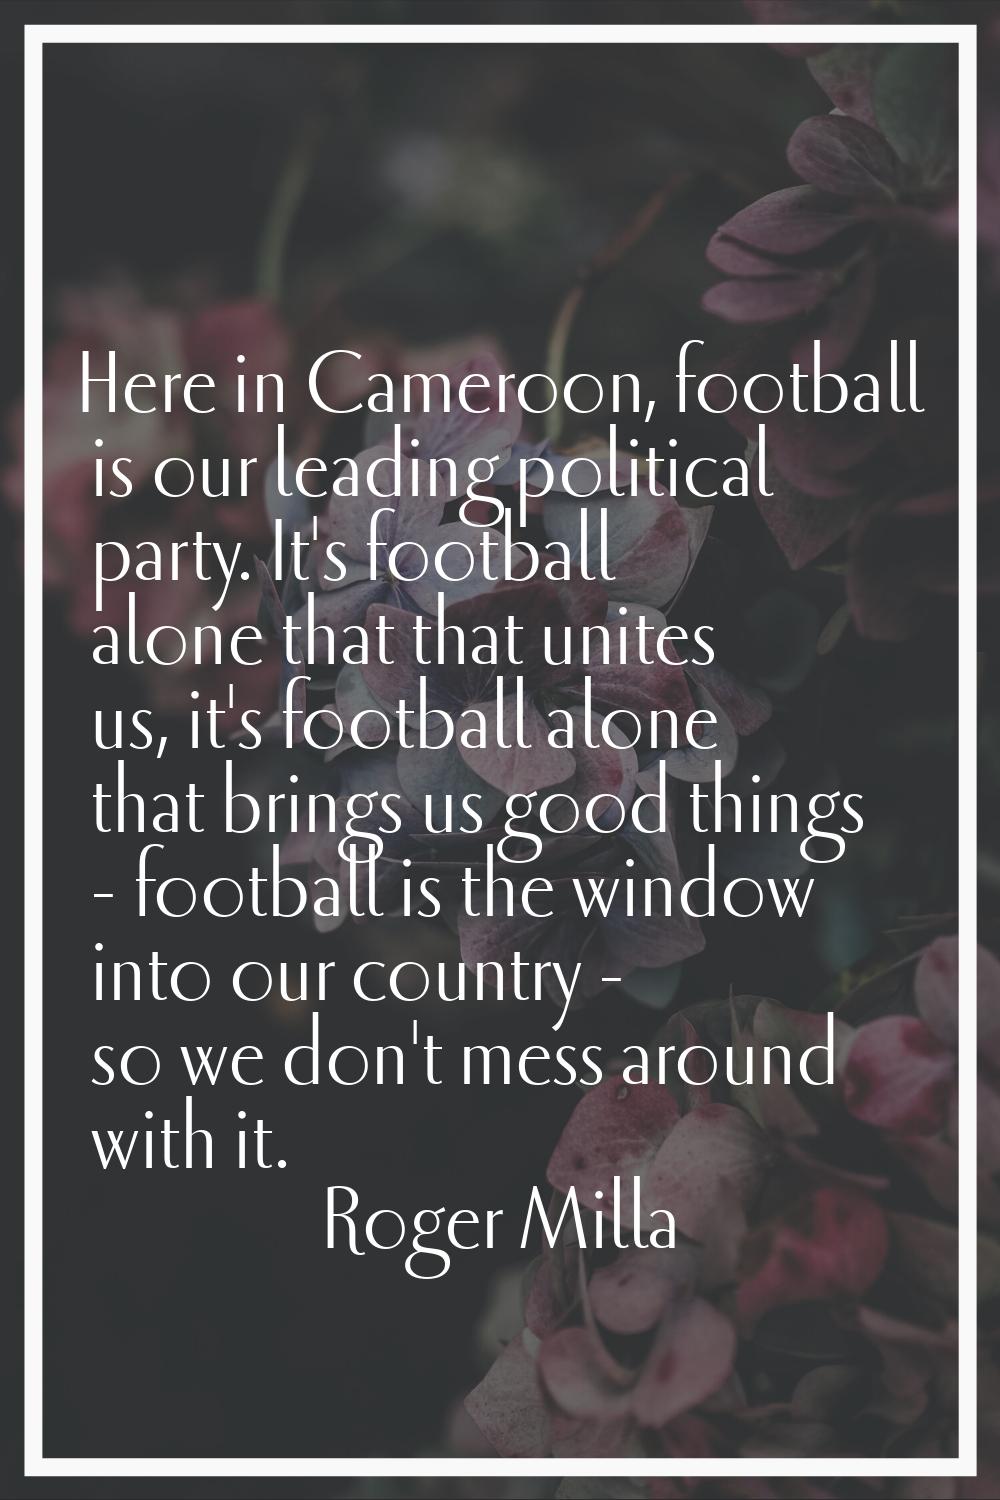 Here in Cameroon, football is our leading political party. It's football alone that that unites us,